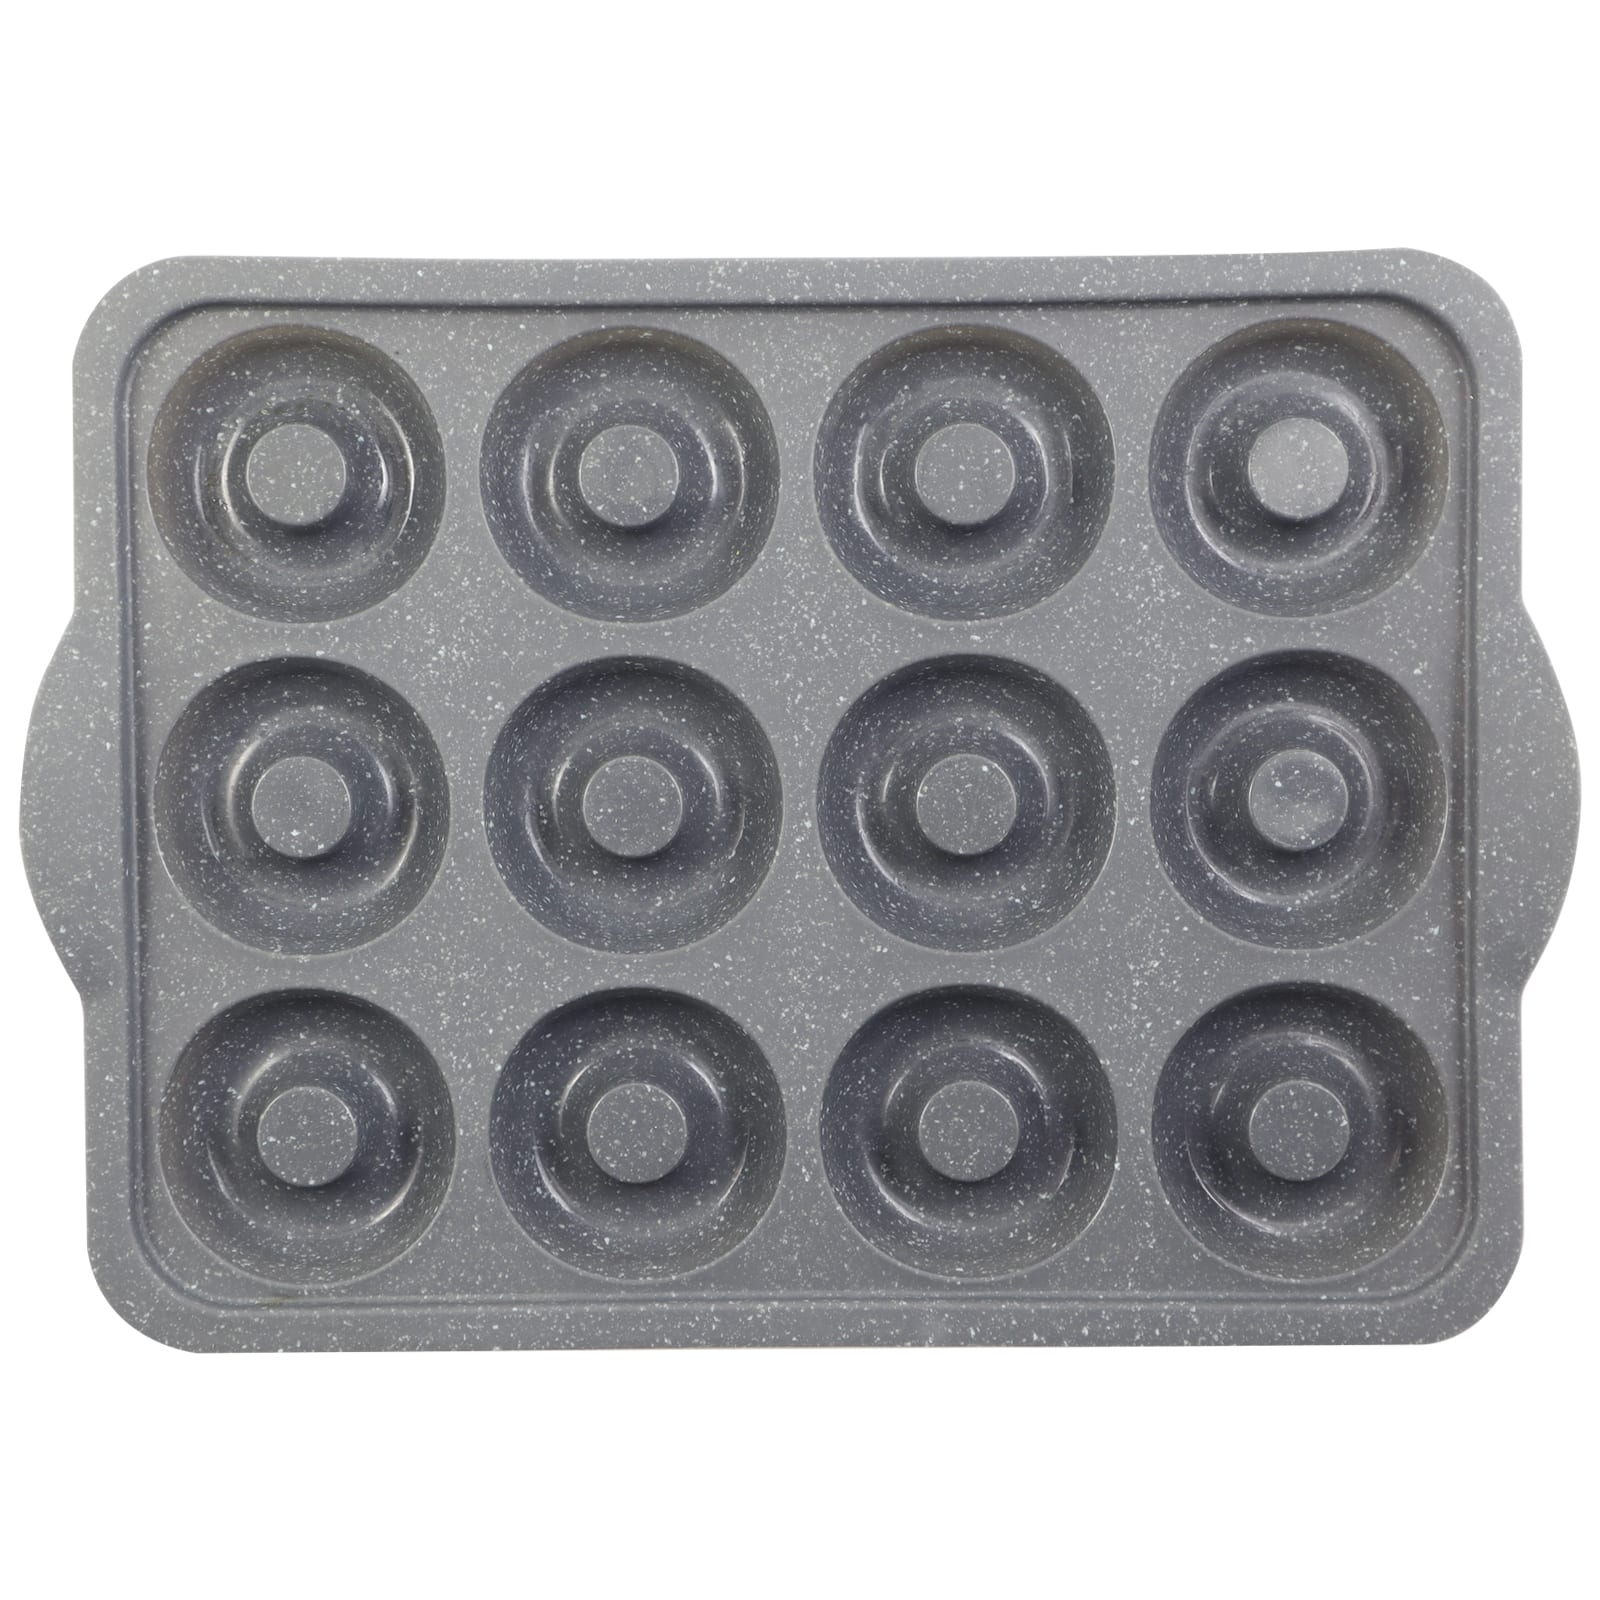 12-Cavity Metal-Reinforced Silicone Mini Donut Pan by Celebrate It®